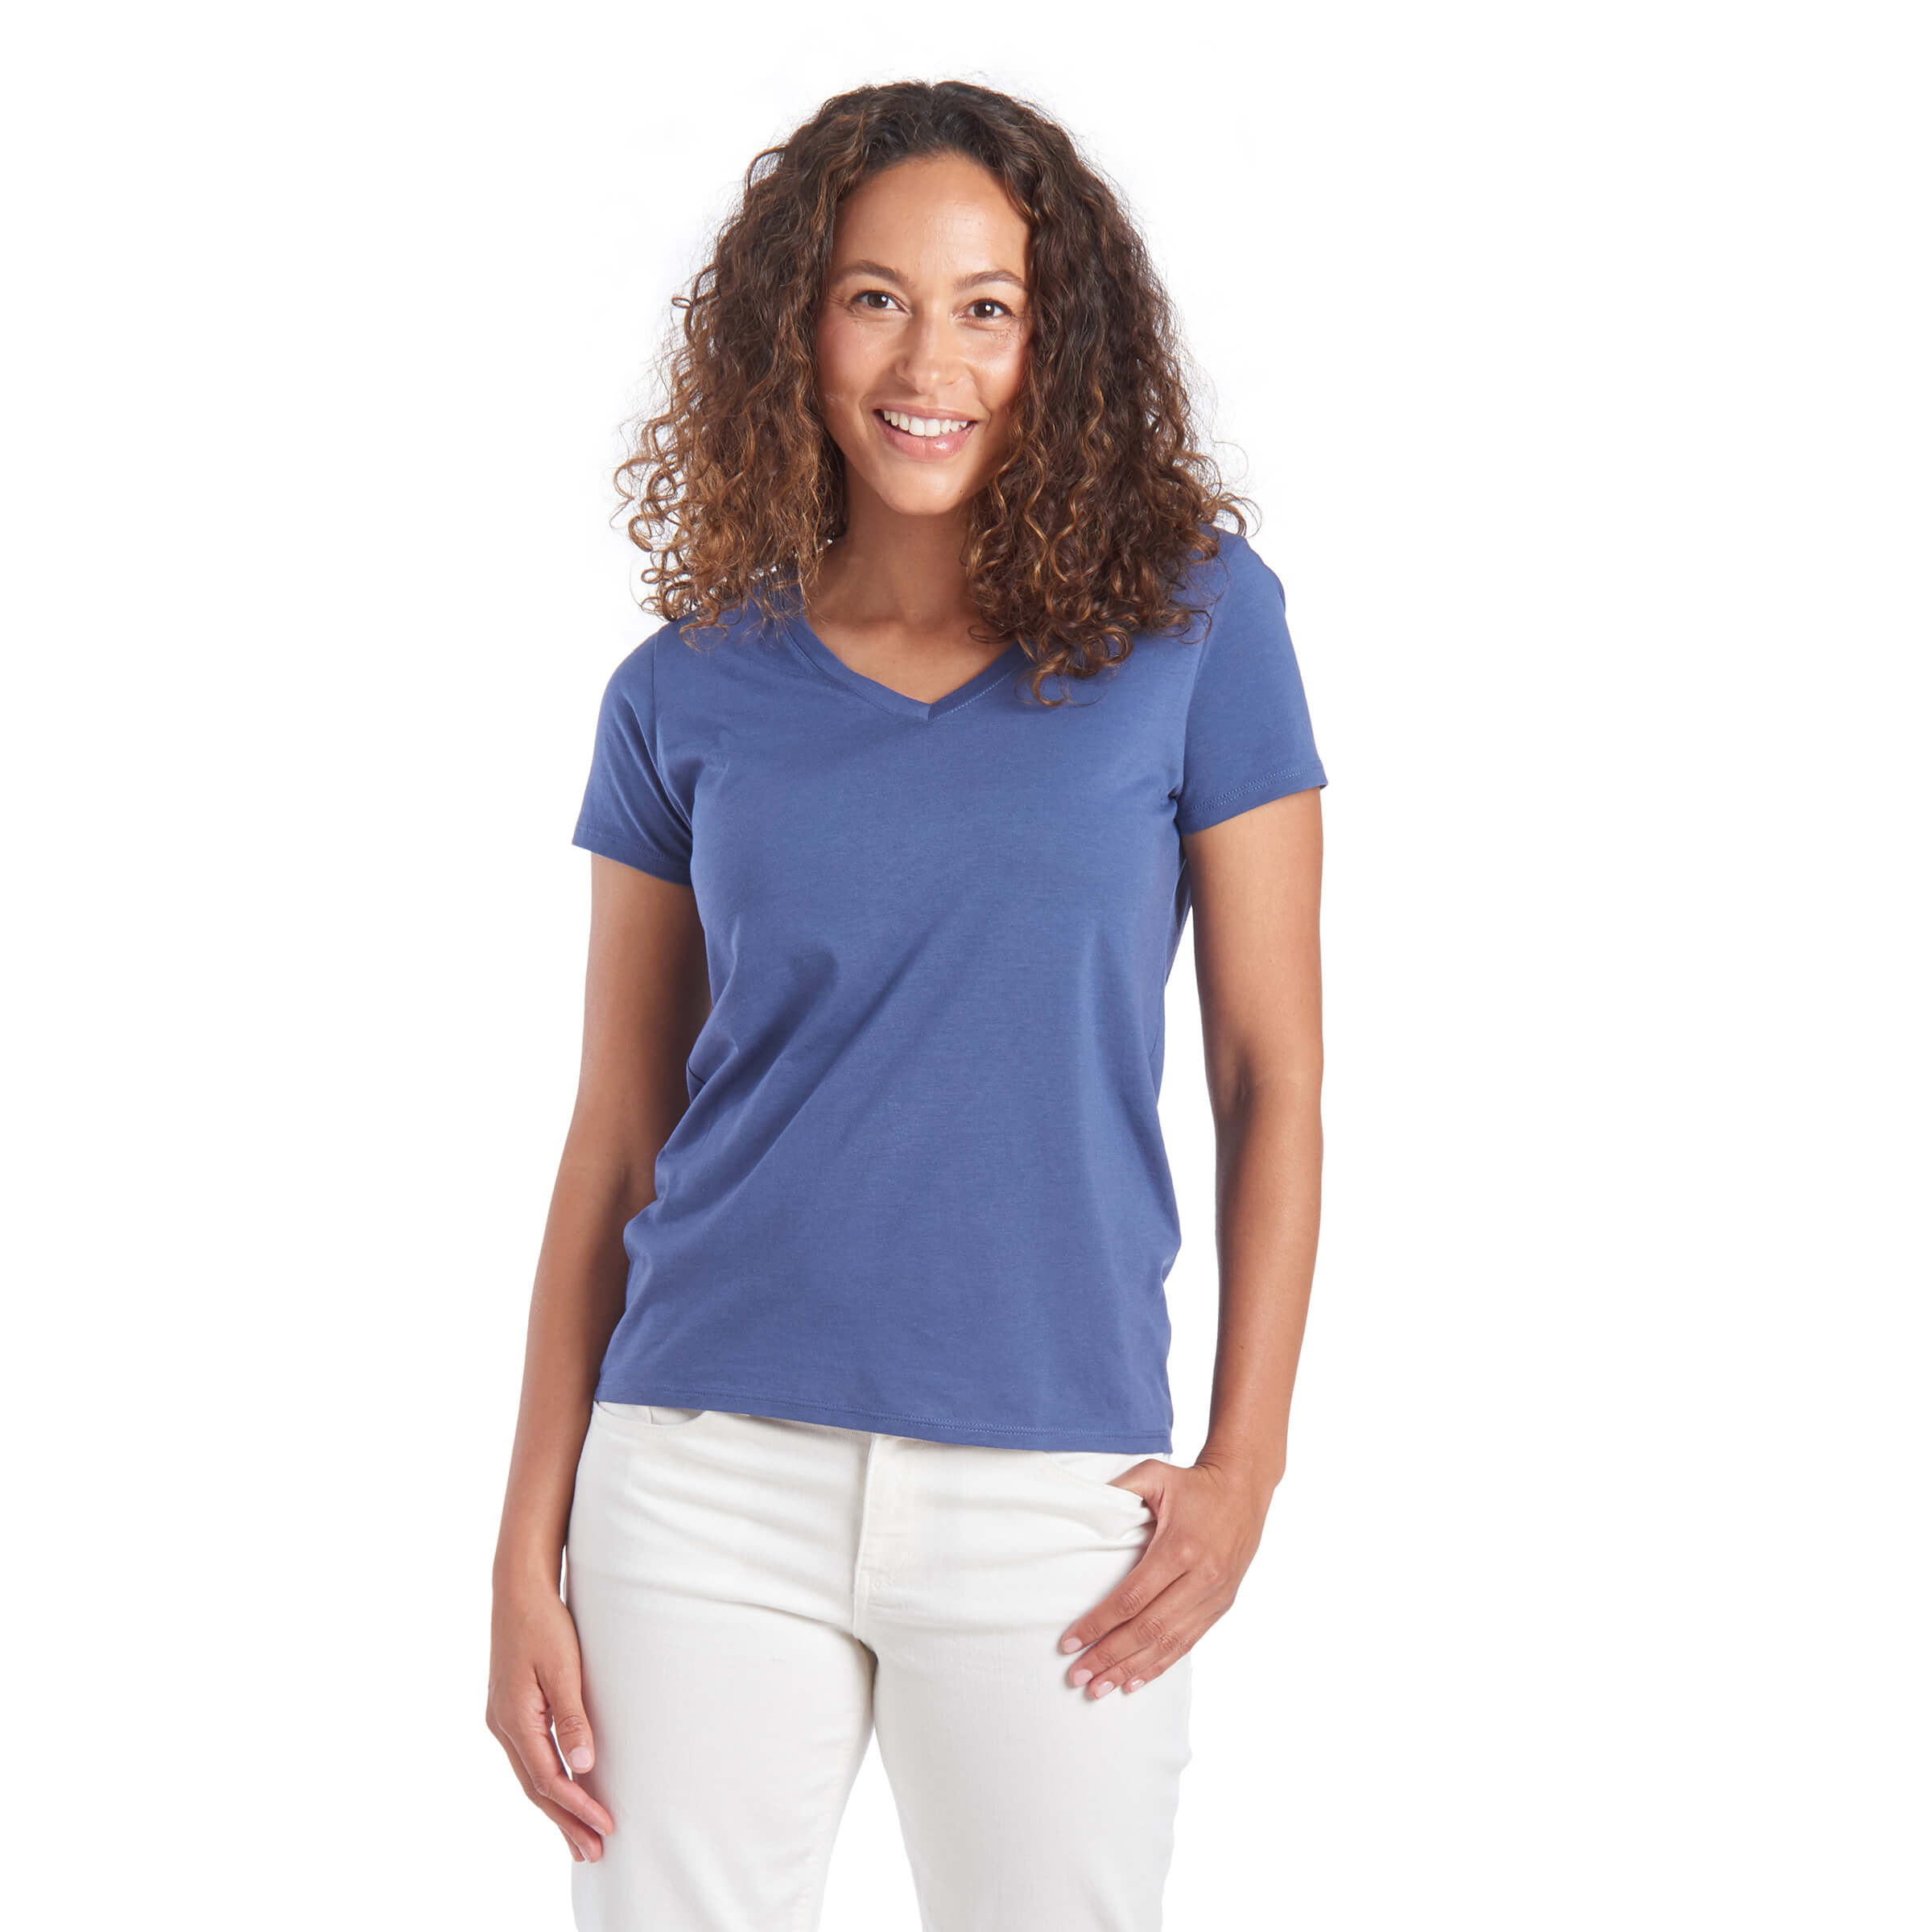 Women wearing Vintage Navy Fitted V-Neck Marcy Tee